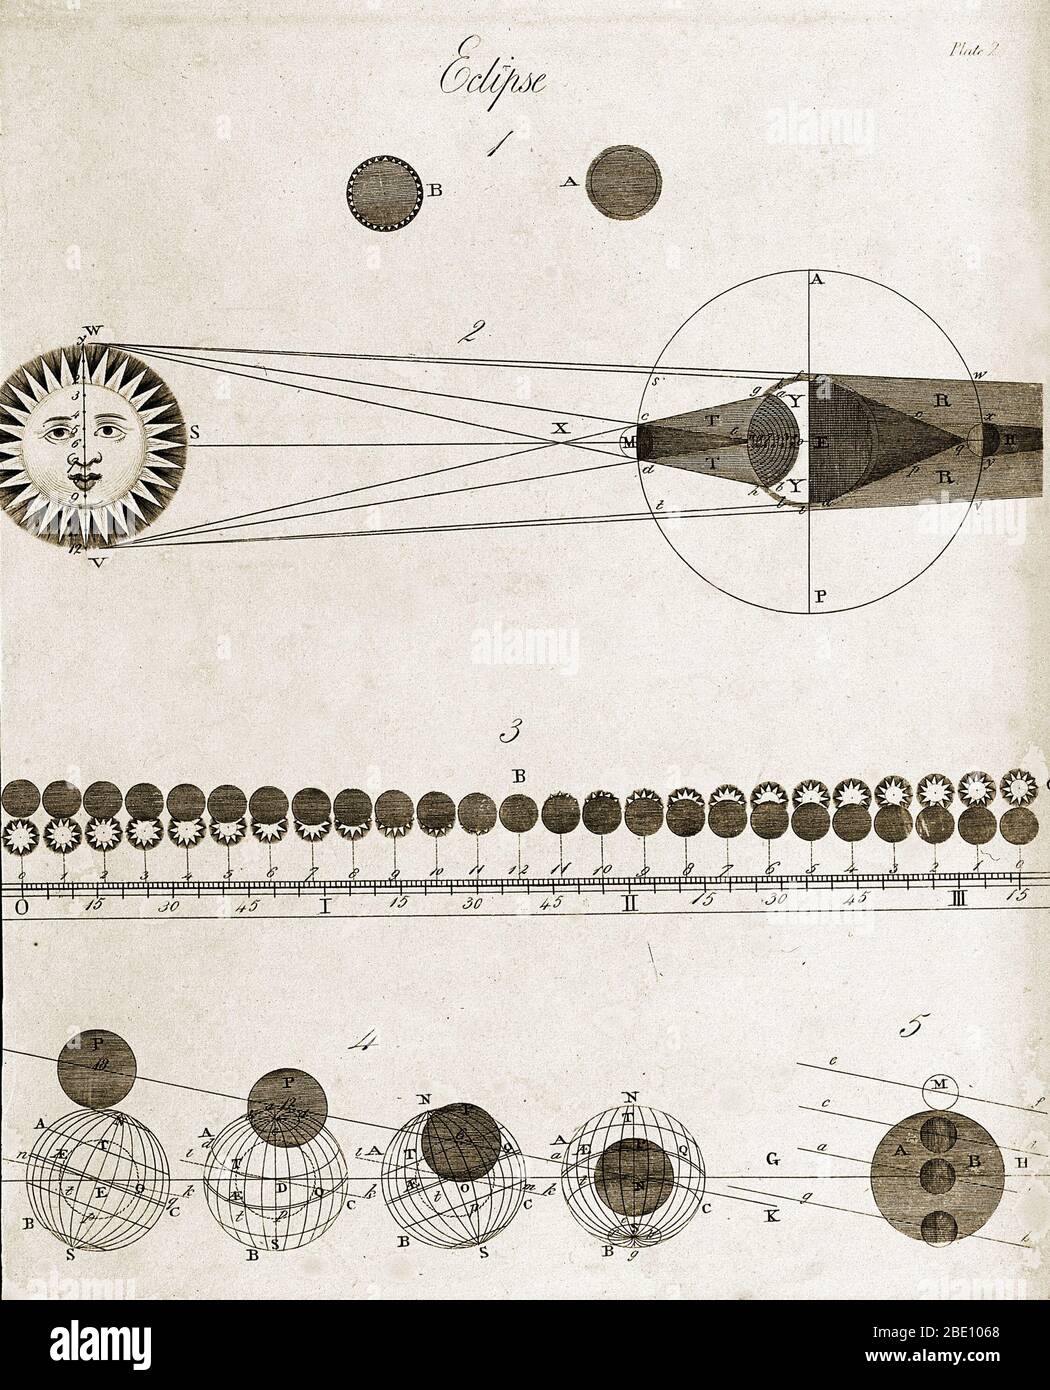 An 18th century diagram of a solar eclipse, showing the principles behind them. Figure I shows difference in appearance between total (B) and annular (A) eclipses. Figure II shows how the Moon (small circle, center right) prevents the light (lines) from the Sun (far left) from reaching the Earth (right), when the Moon is situated between the Earth and the Sun. Figure III shows how the position of the Moon (black circles), as viewed from different latitudes, affects the appearance of the Sun during a solar eclipse. Figure IV shows the path of the moon (small circle) in front of the Earth (large Stock Photo